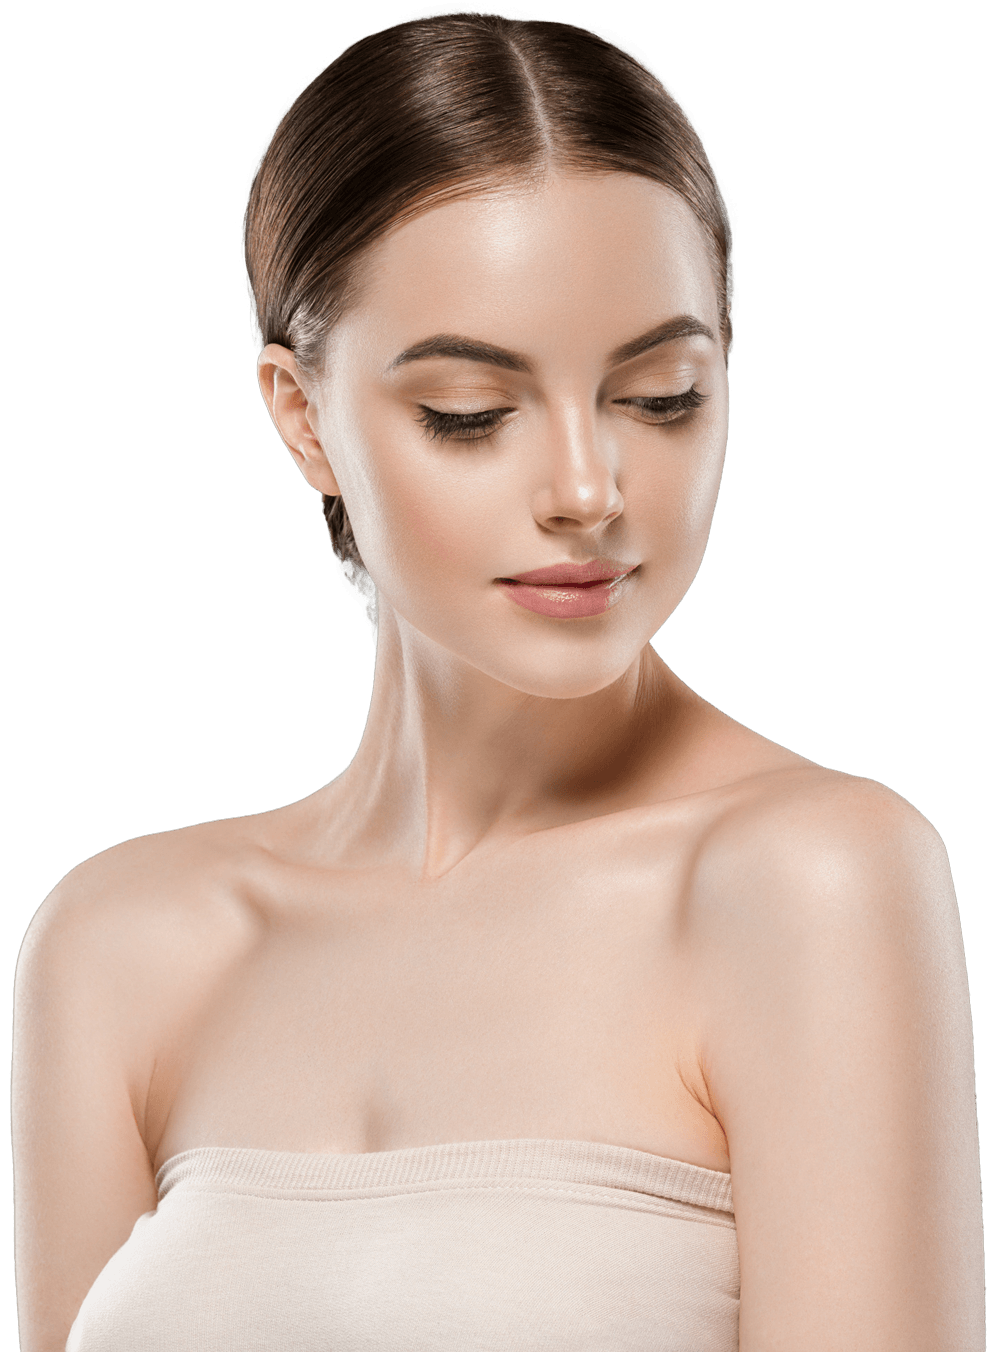 Bowral Cosmetic Treatments Pricing